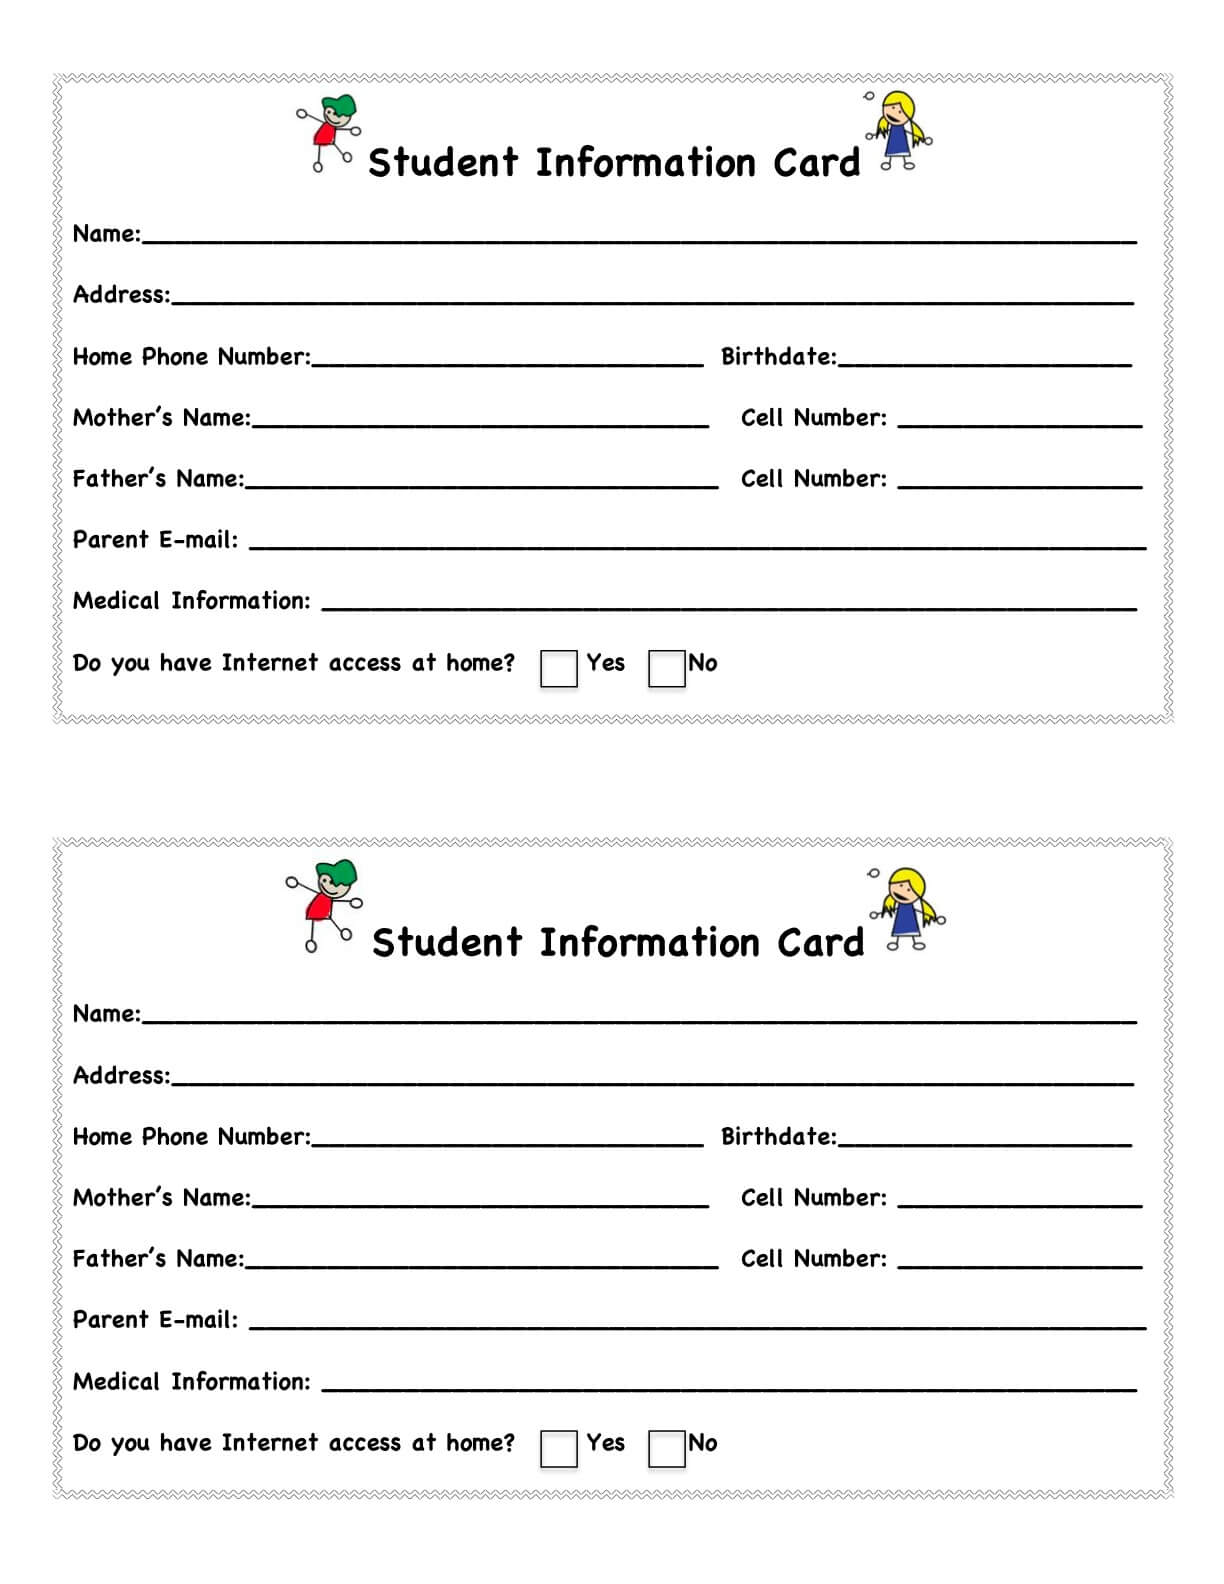 Student Information Card Template ] – Back To School Regarding Student Information Card Template